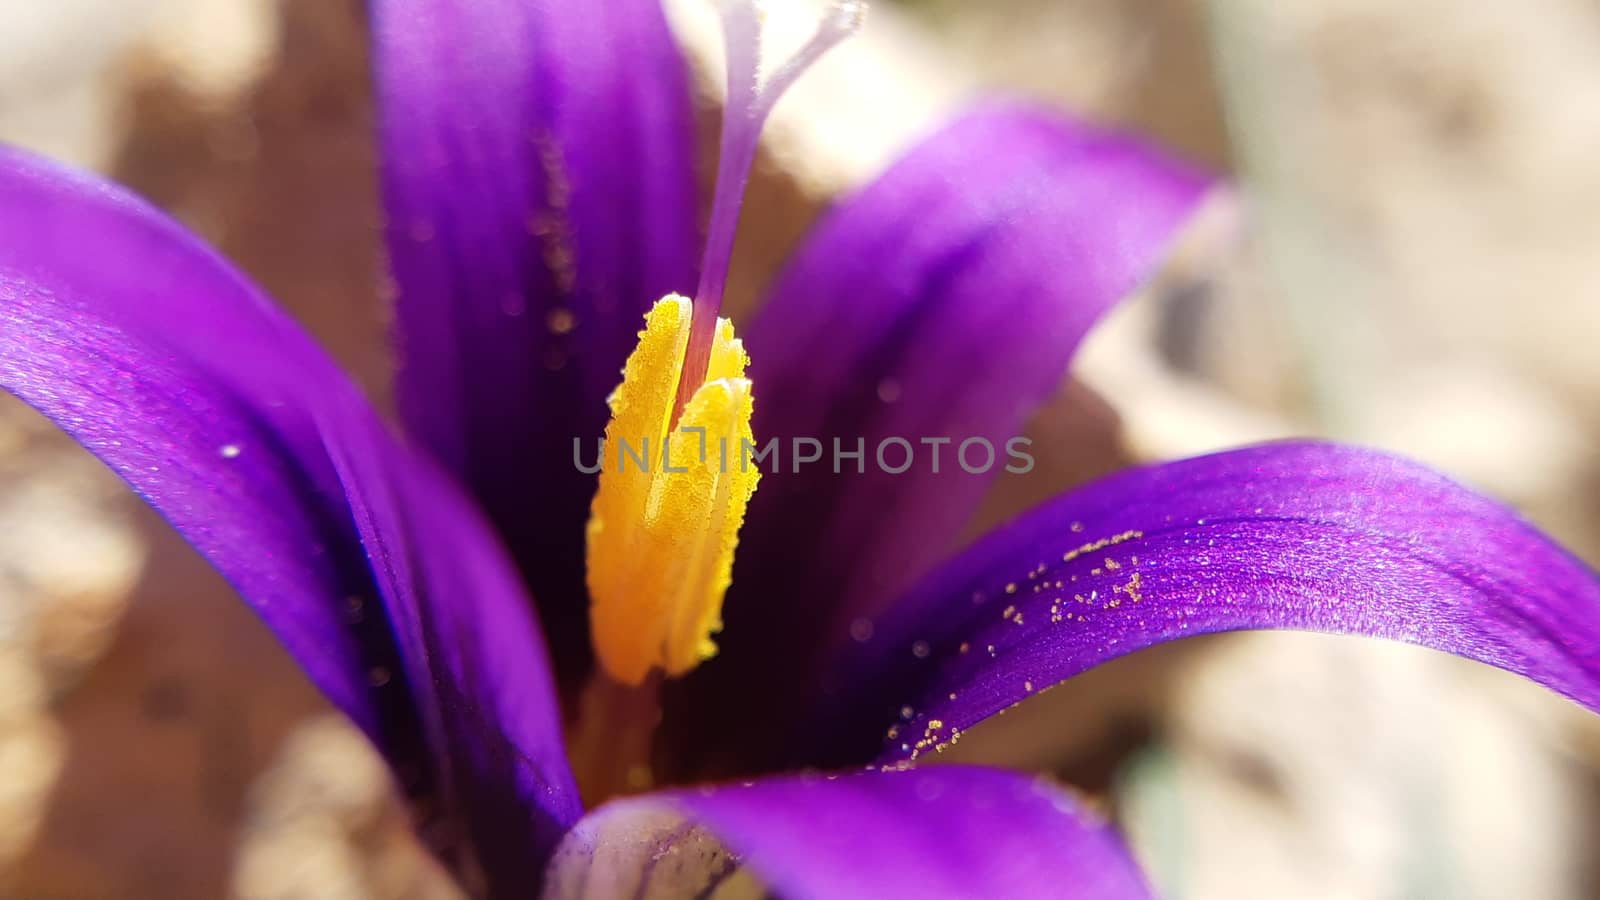 Close-up and detail of two crocus flowers opening up. Purple leaves and yellow pistil. Macro shot.